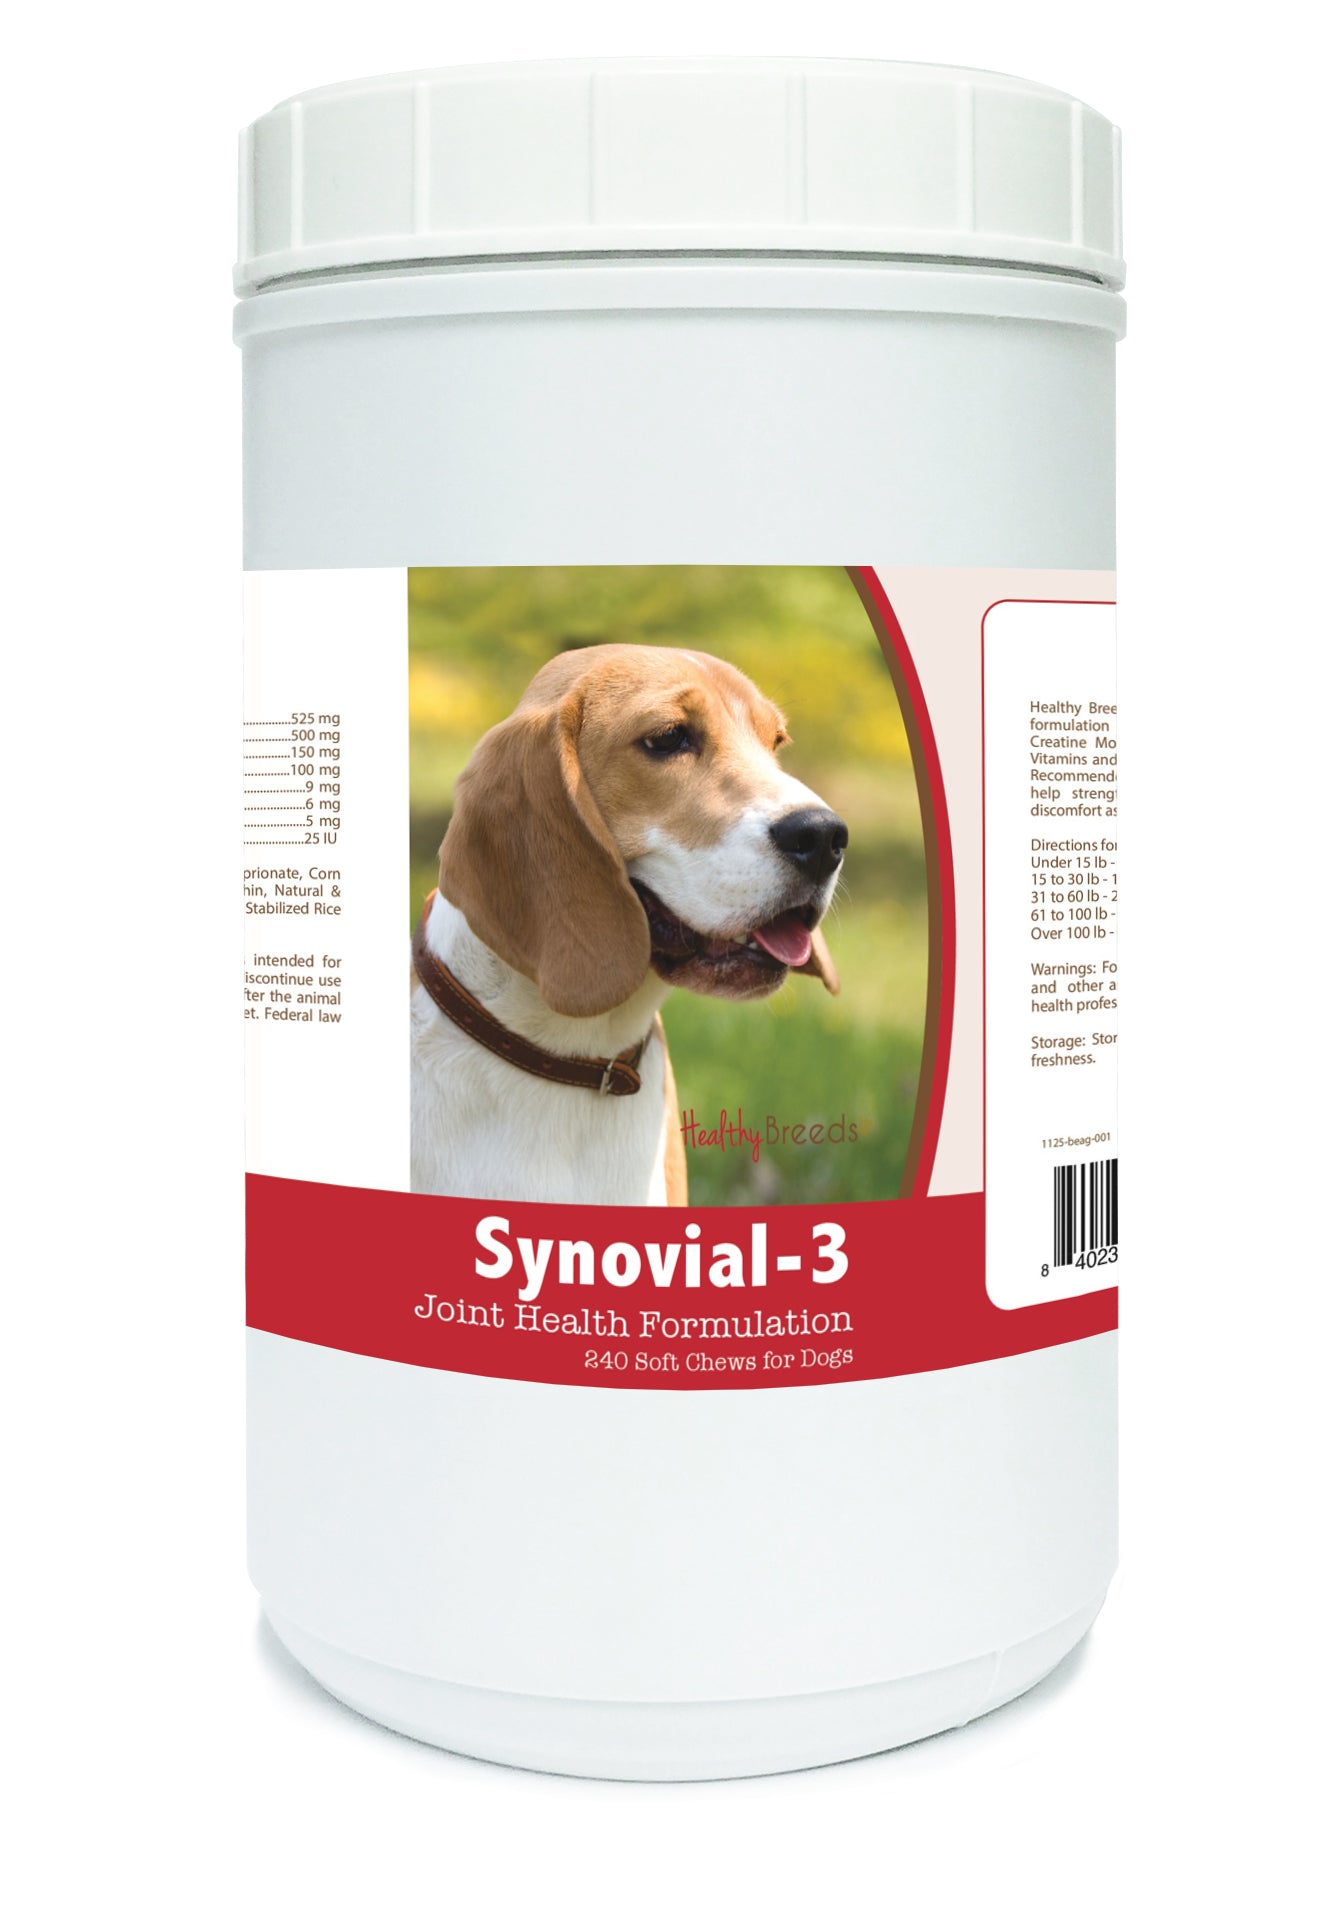 Beagle Synovial-3 Joint Health Formulation Soft Chews 240 Count